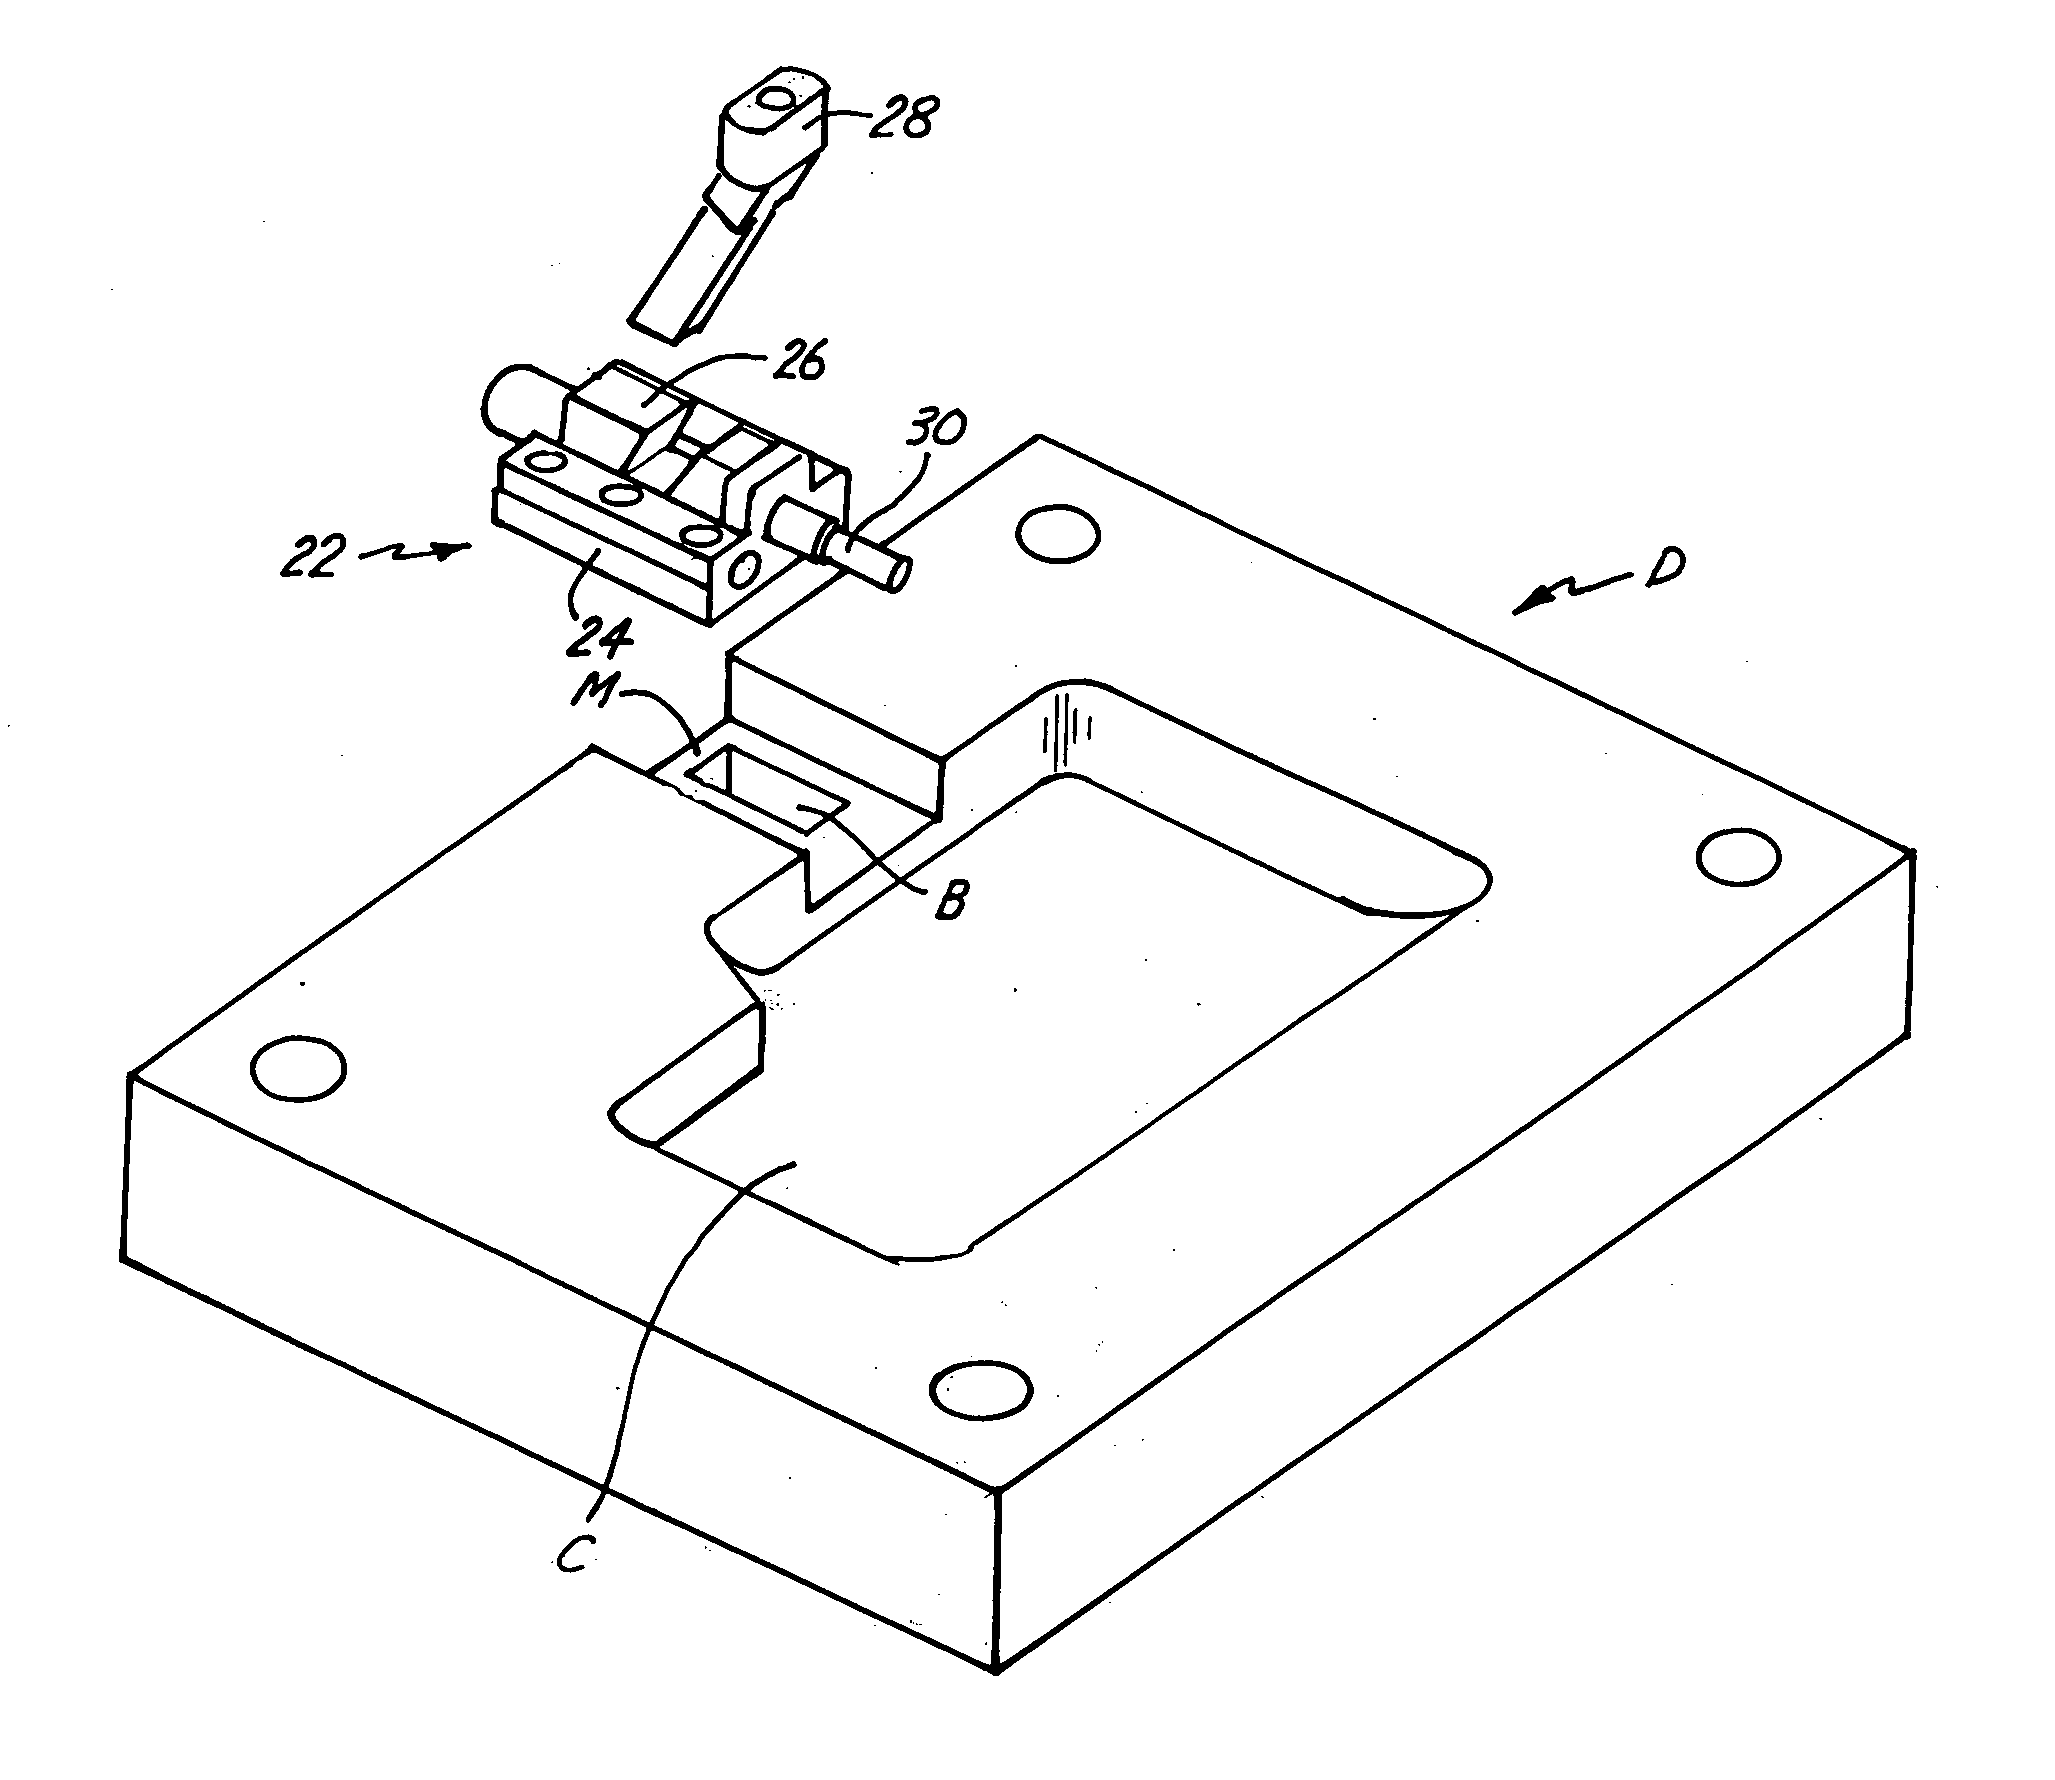 Universal slide assembly for molding and casting systems